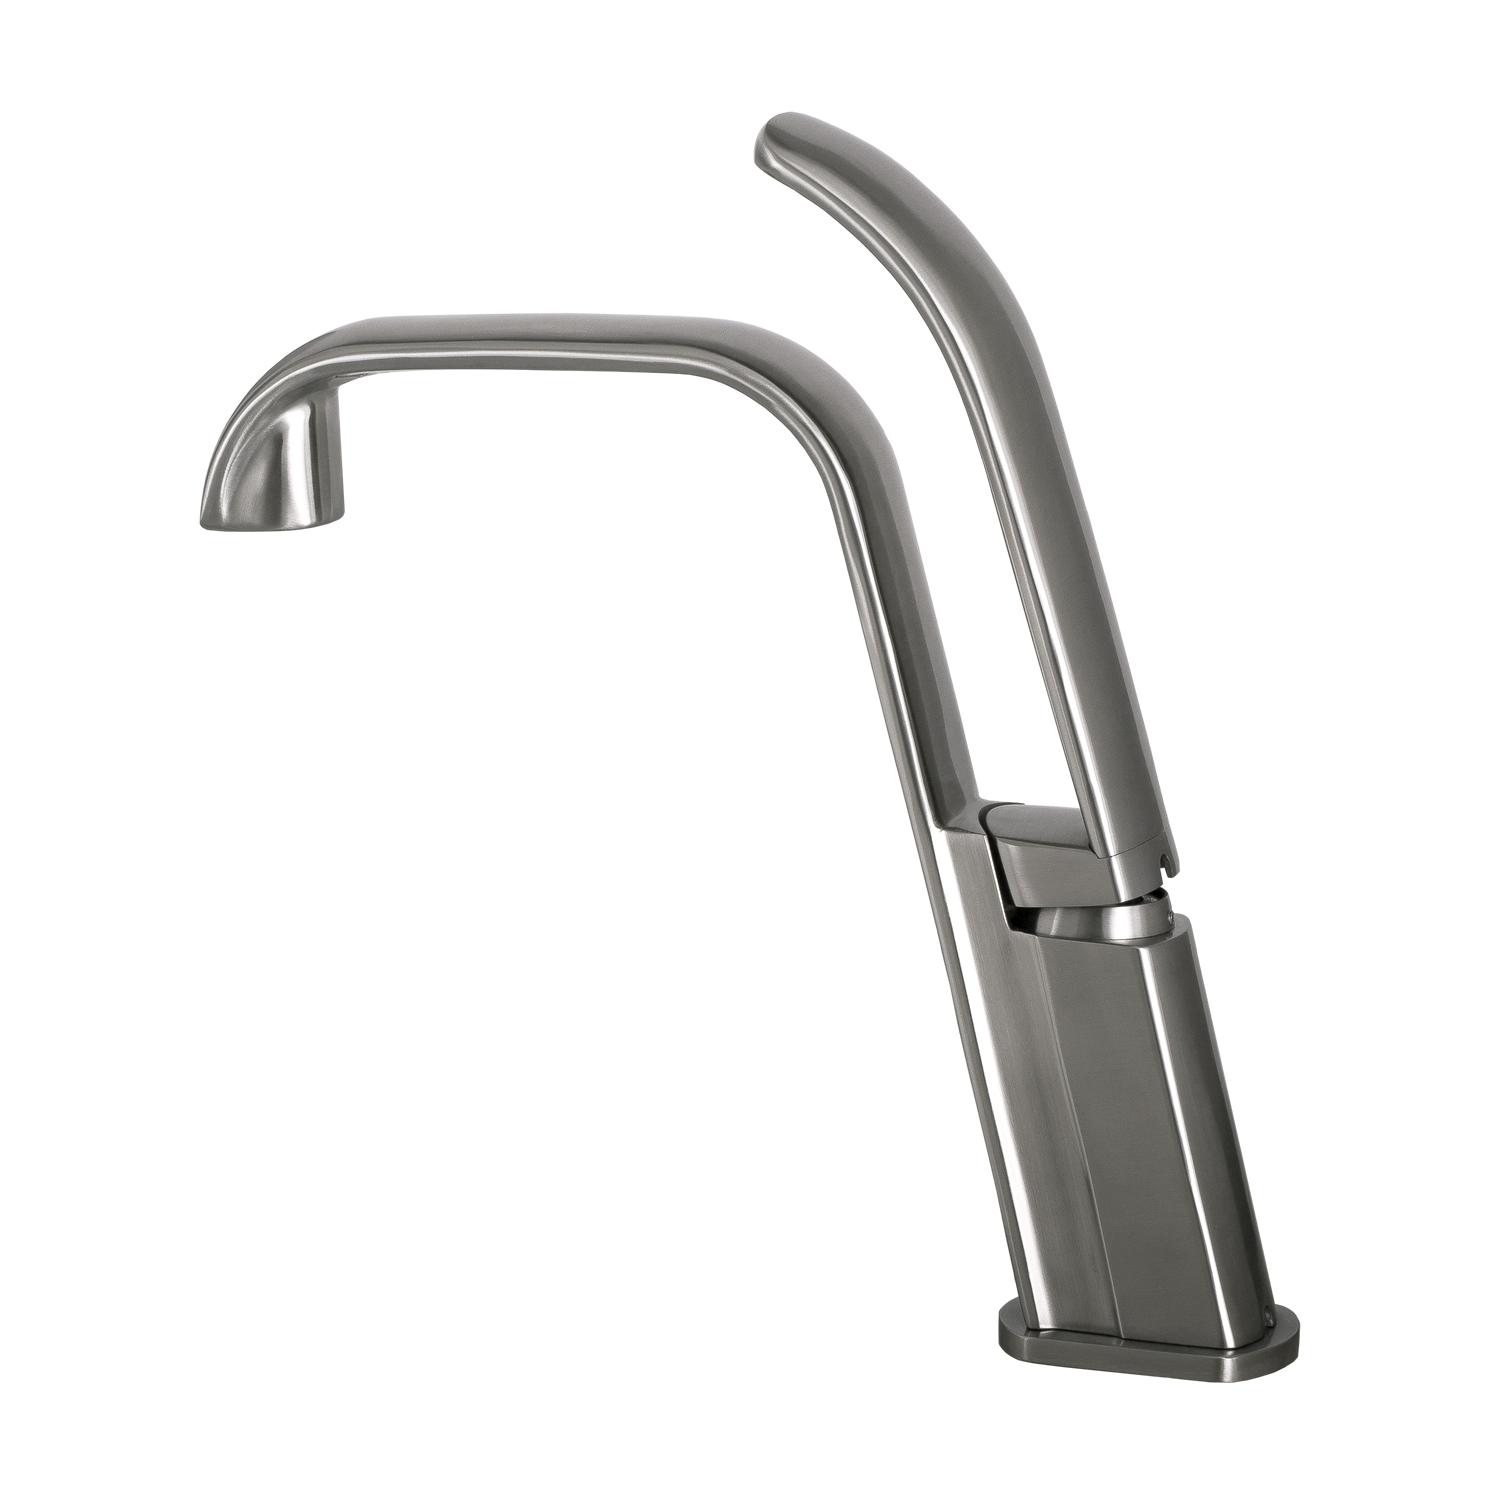 DAX Single Handle Bathroom Faucet, Stainless Steel Body, Brushed Finish, 10-13/16 x 11-1/2 Inches (DAX-C011-01)